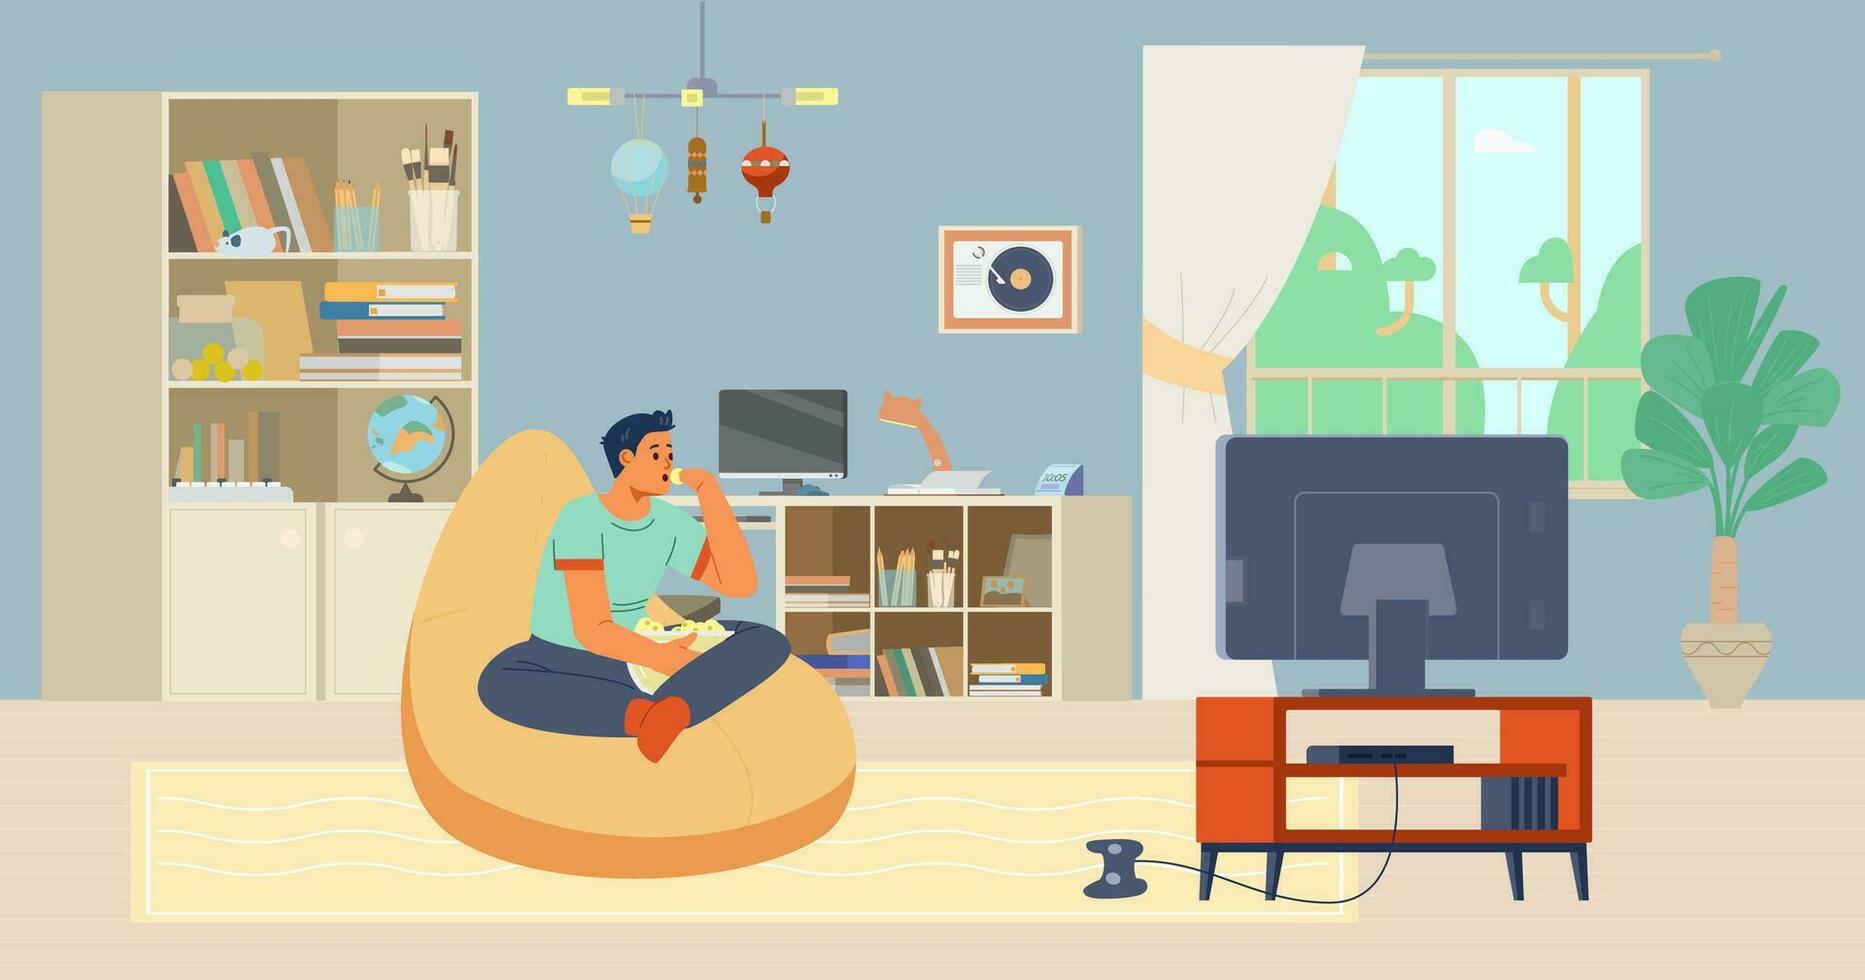 Teenage boy watching TV at home in his room flat vector illustration. Boy sitting on the bean bag chair eating pop corn.